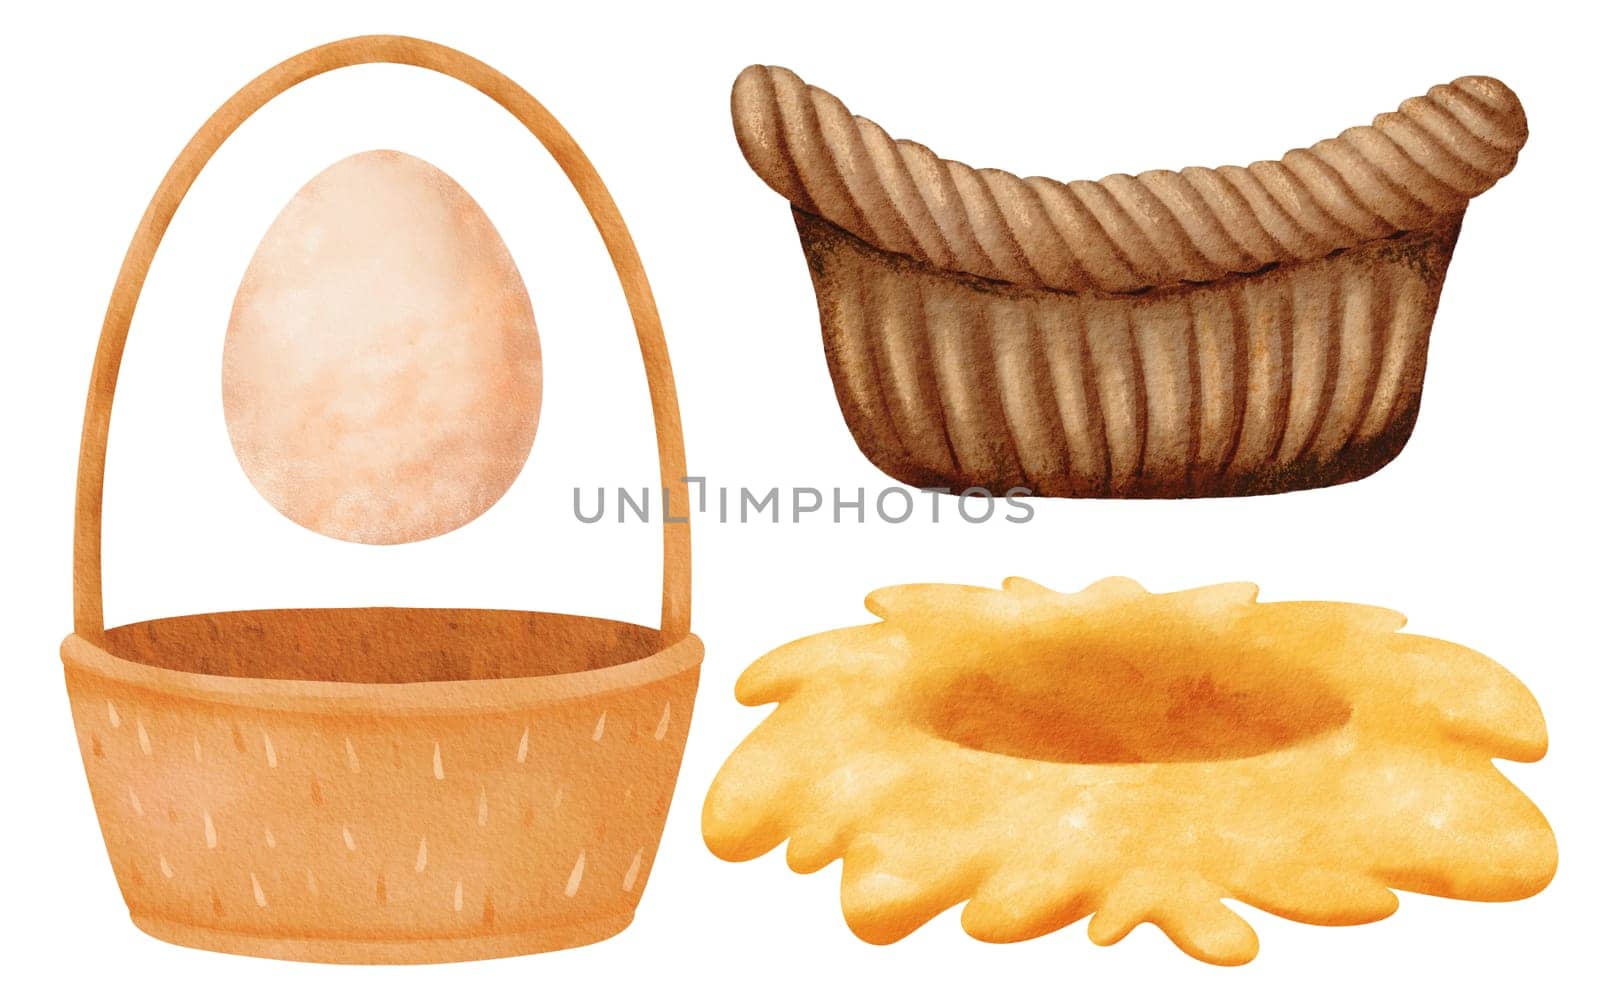 watercolor set. high-handle and handle-less baskets, a chicken egg, and a bird's nest made of straw. cartoon style. From farmhouse-themed illustrations to decorative designs, rustic elements.